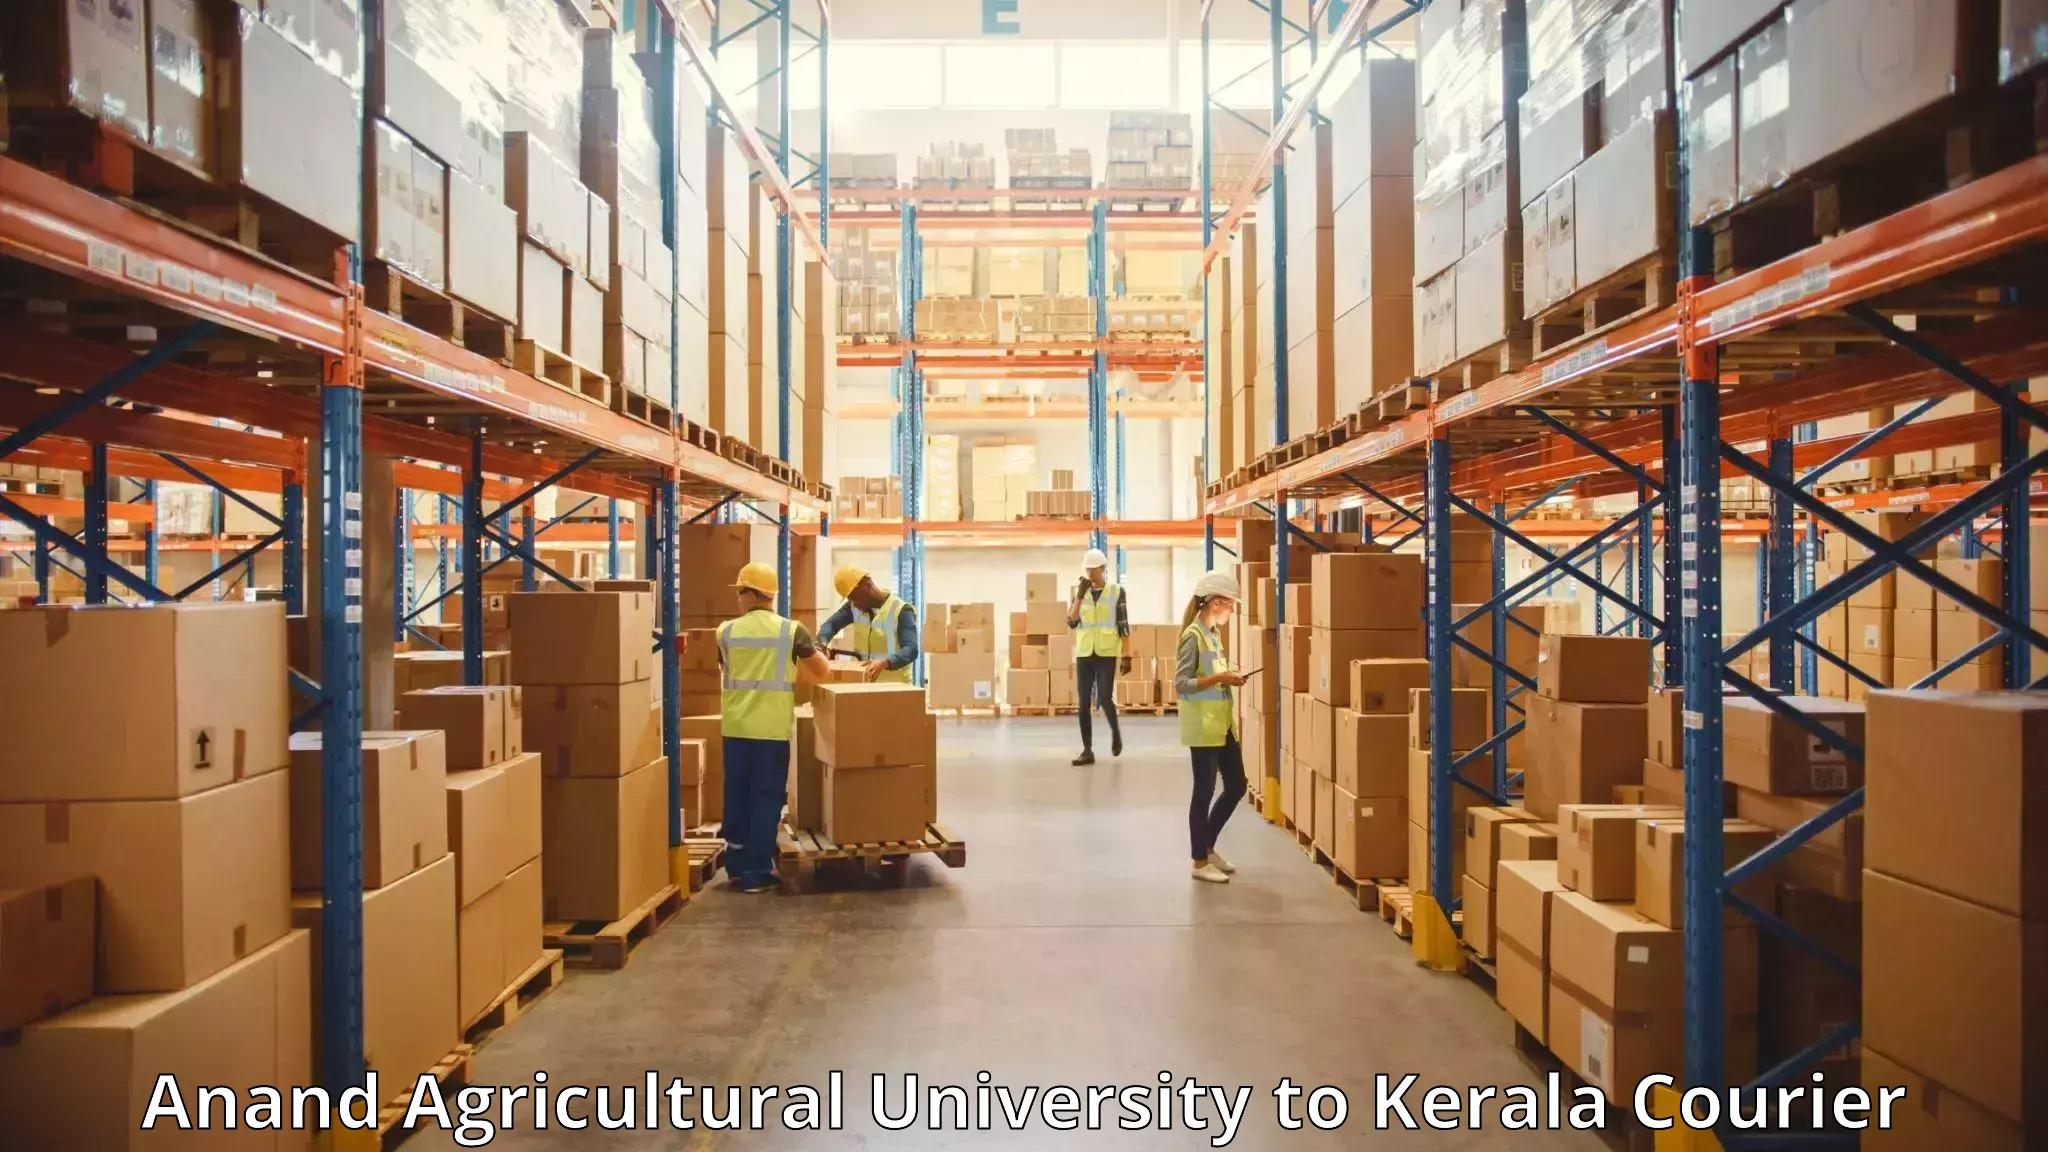 Baggage relocation service Anand Agricultural University to Kerala